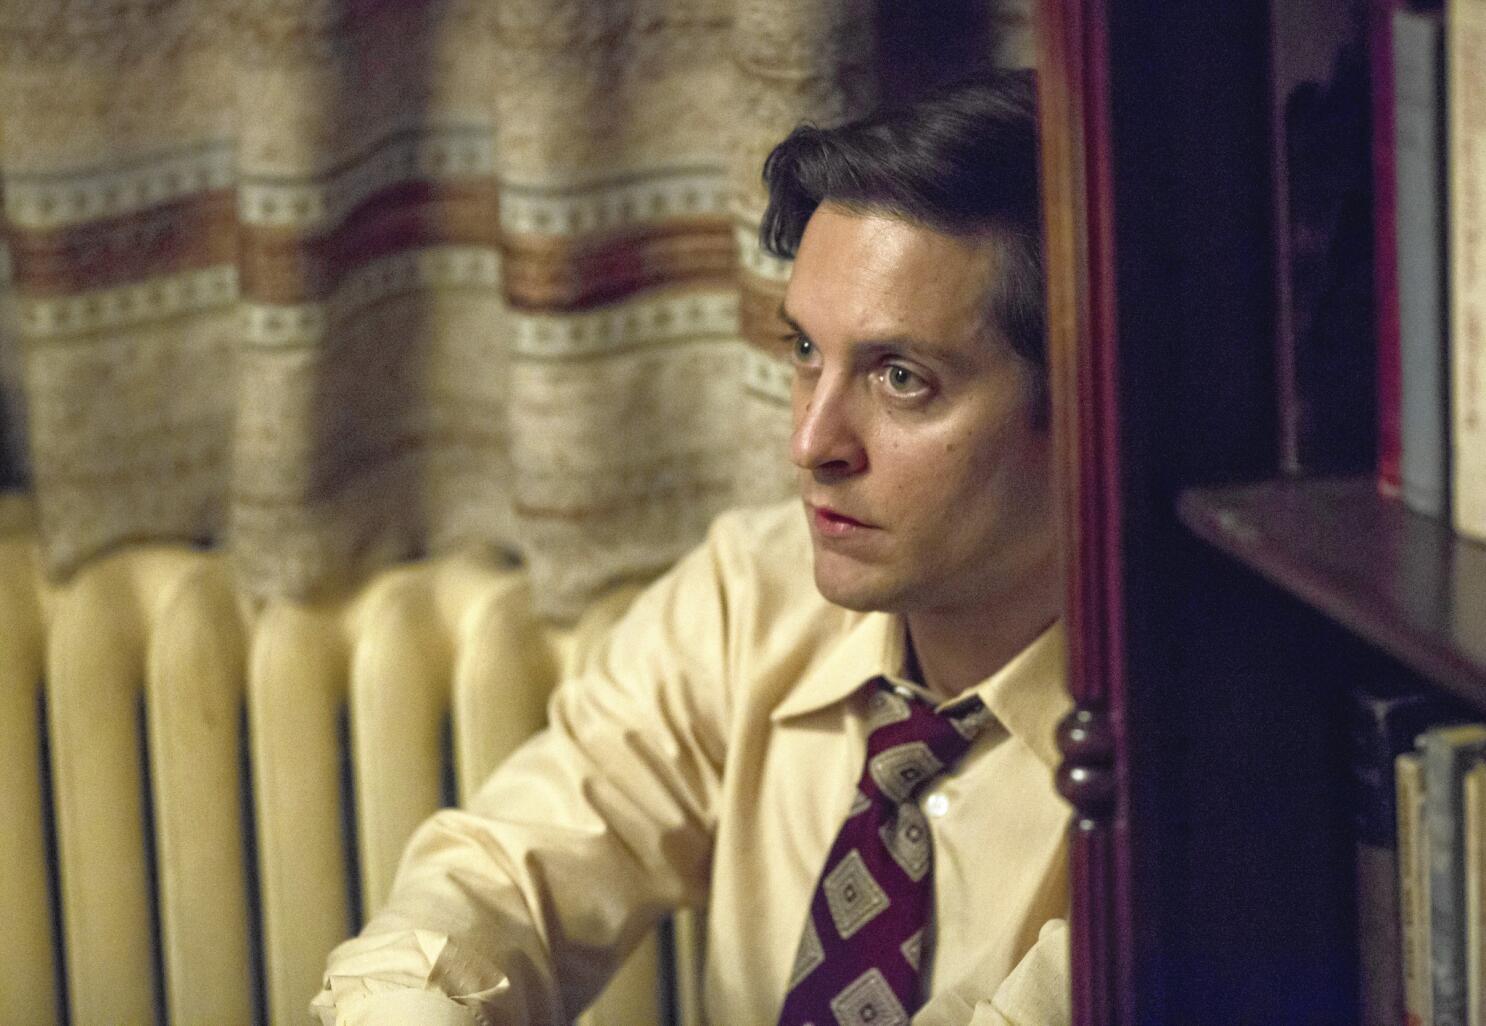 TIFF: Tobey Maguire's Bobby Fischer movie sells for low seven figures